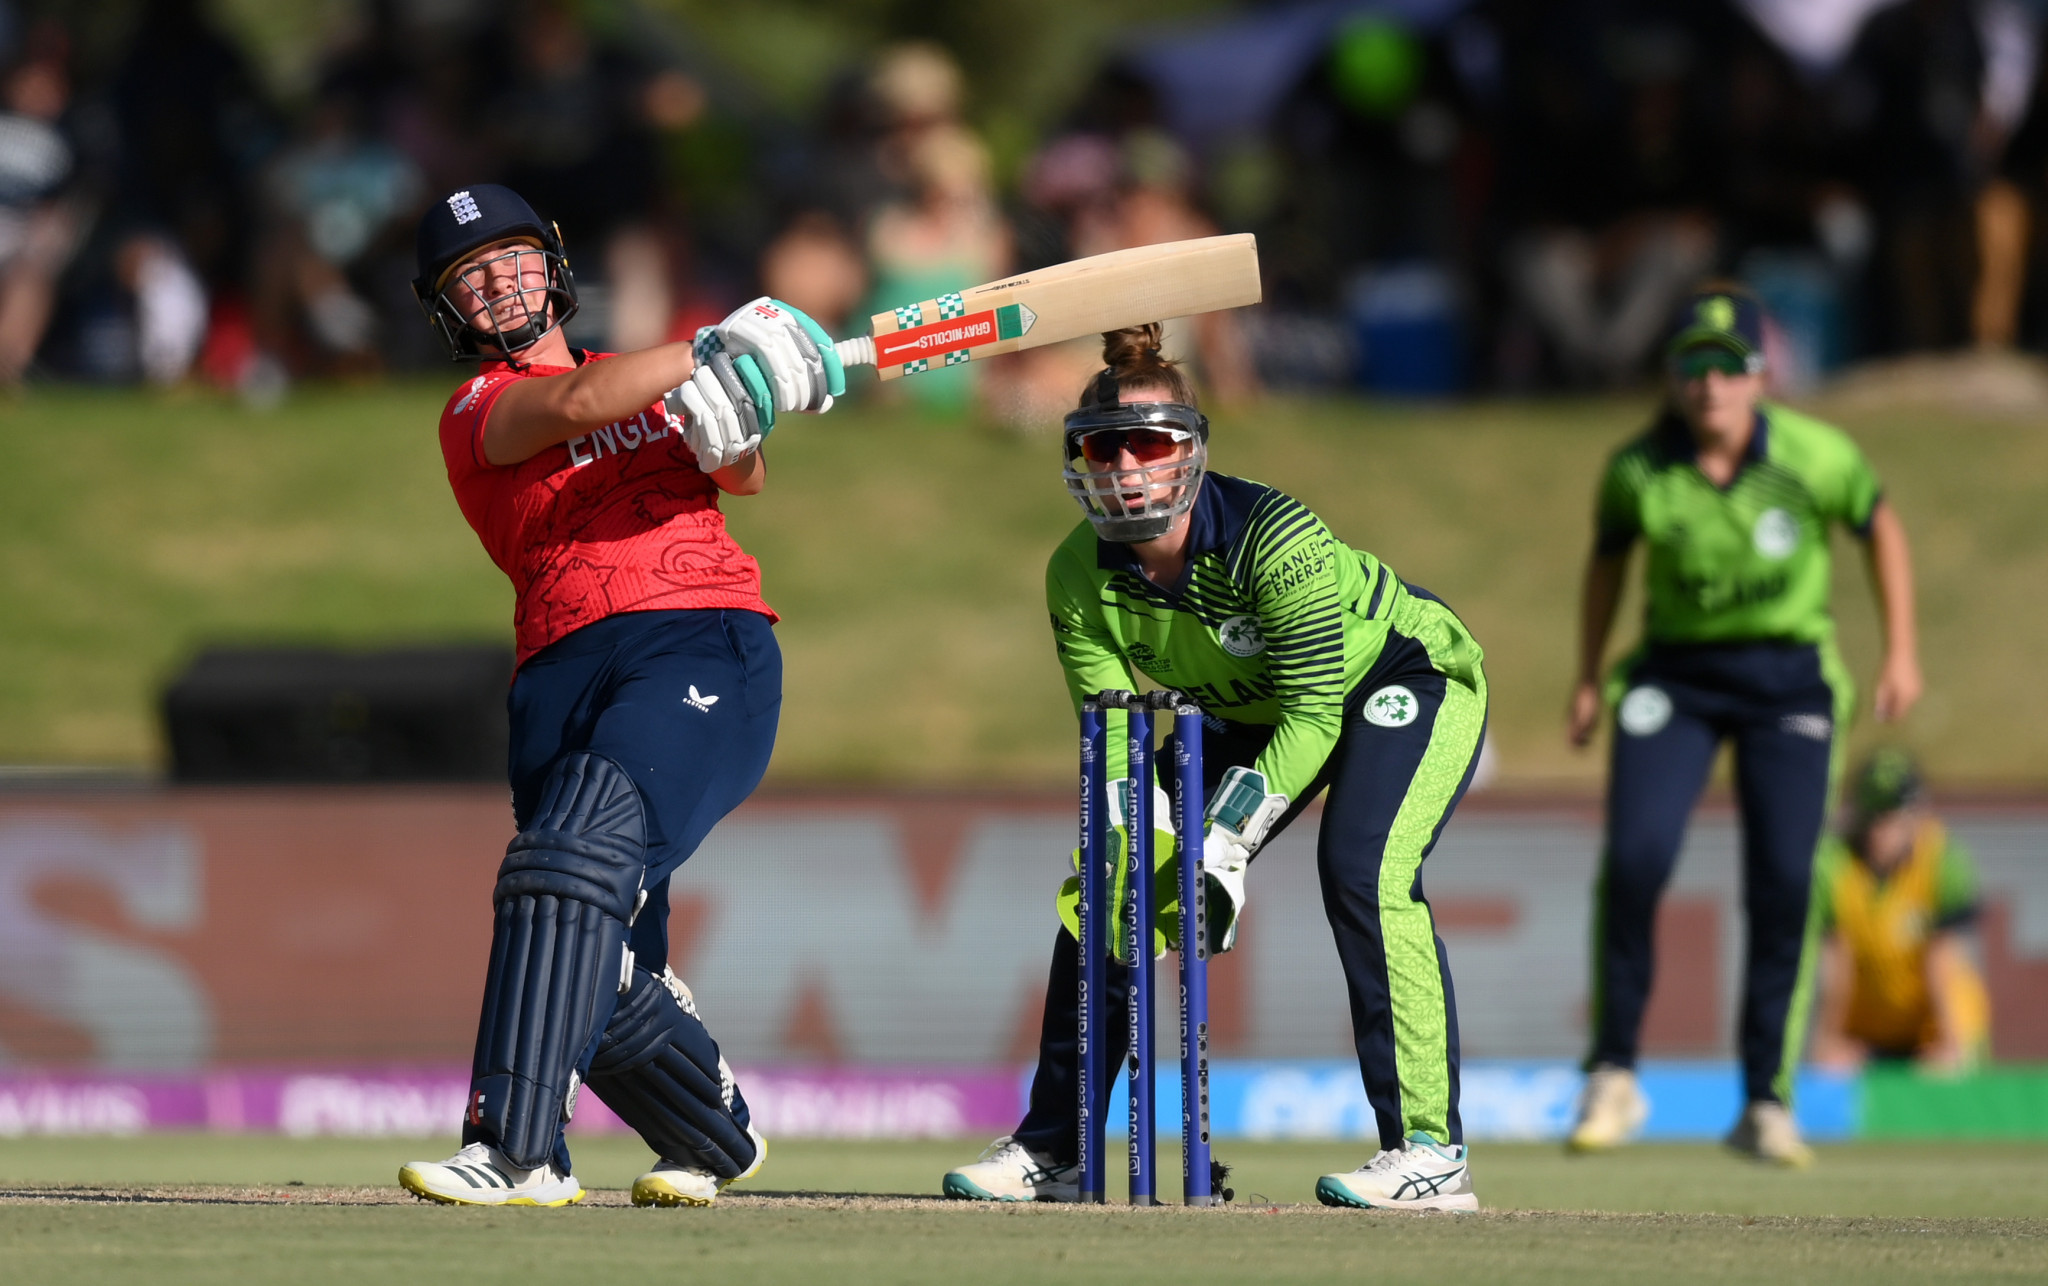 Alice Capsey scored 51 runs off 22 balls to help England cruise past Ireland at the T20 World Cup in South Africa ©Getty Images